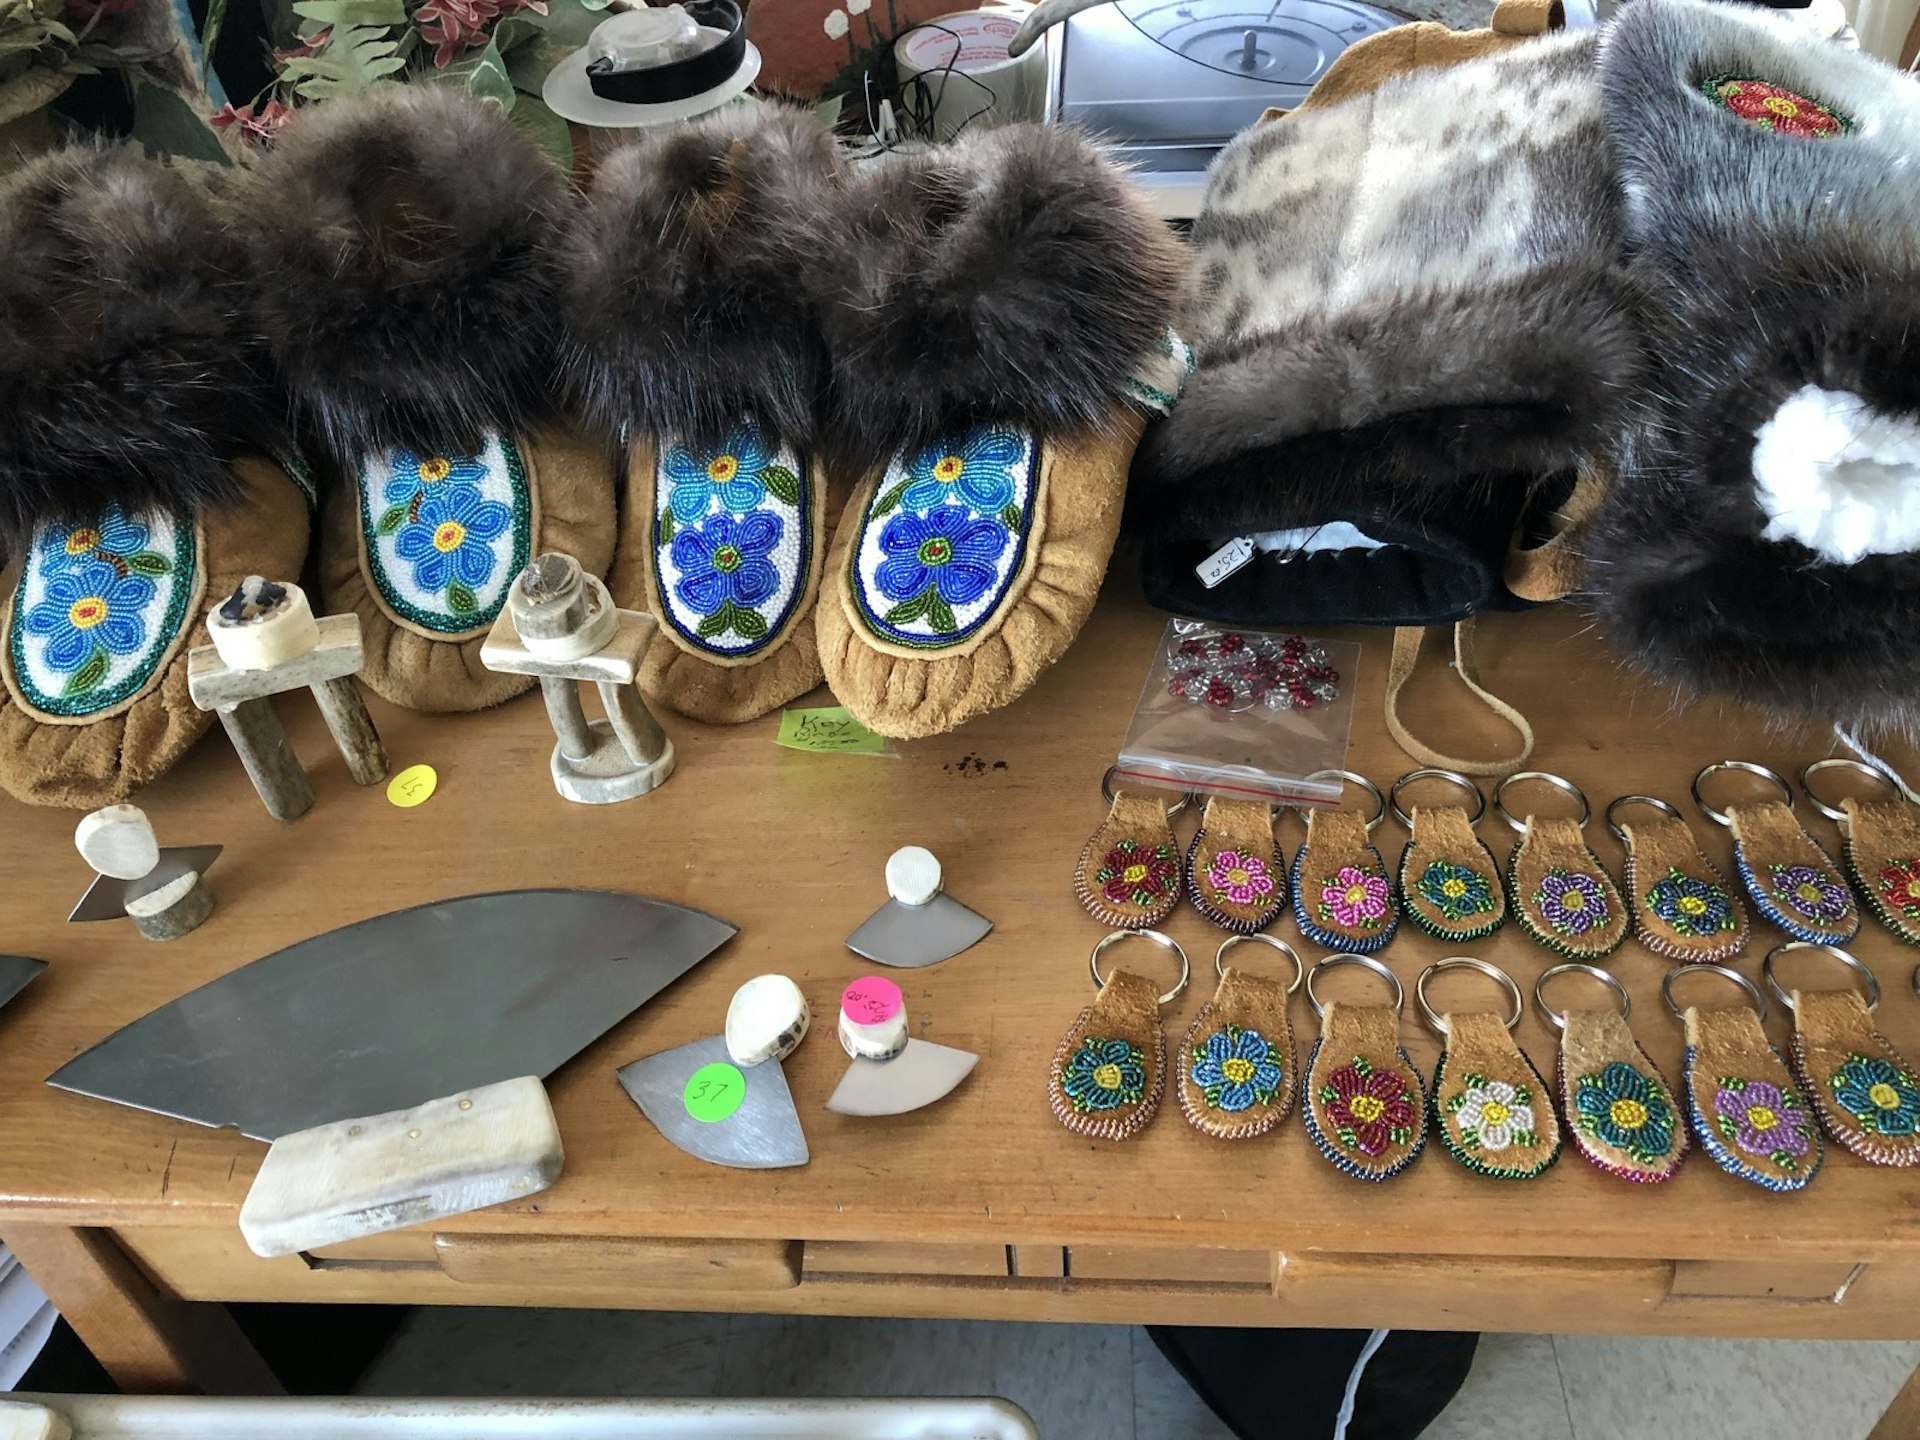 Fur lined moccasins and keychains are some of the hand-crafted items on display and for sale at a Northwest Territories shop